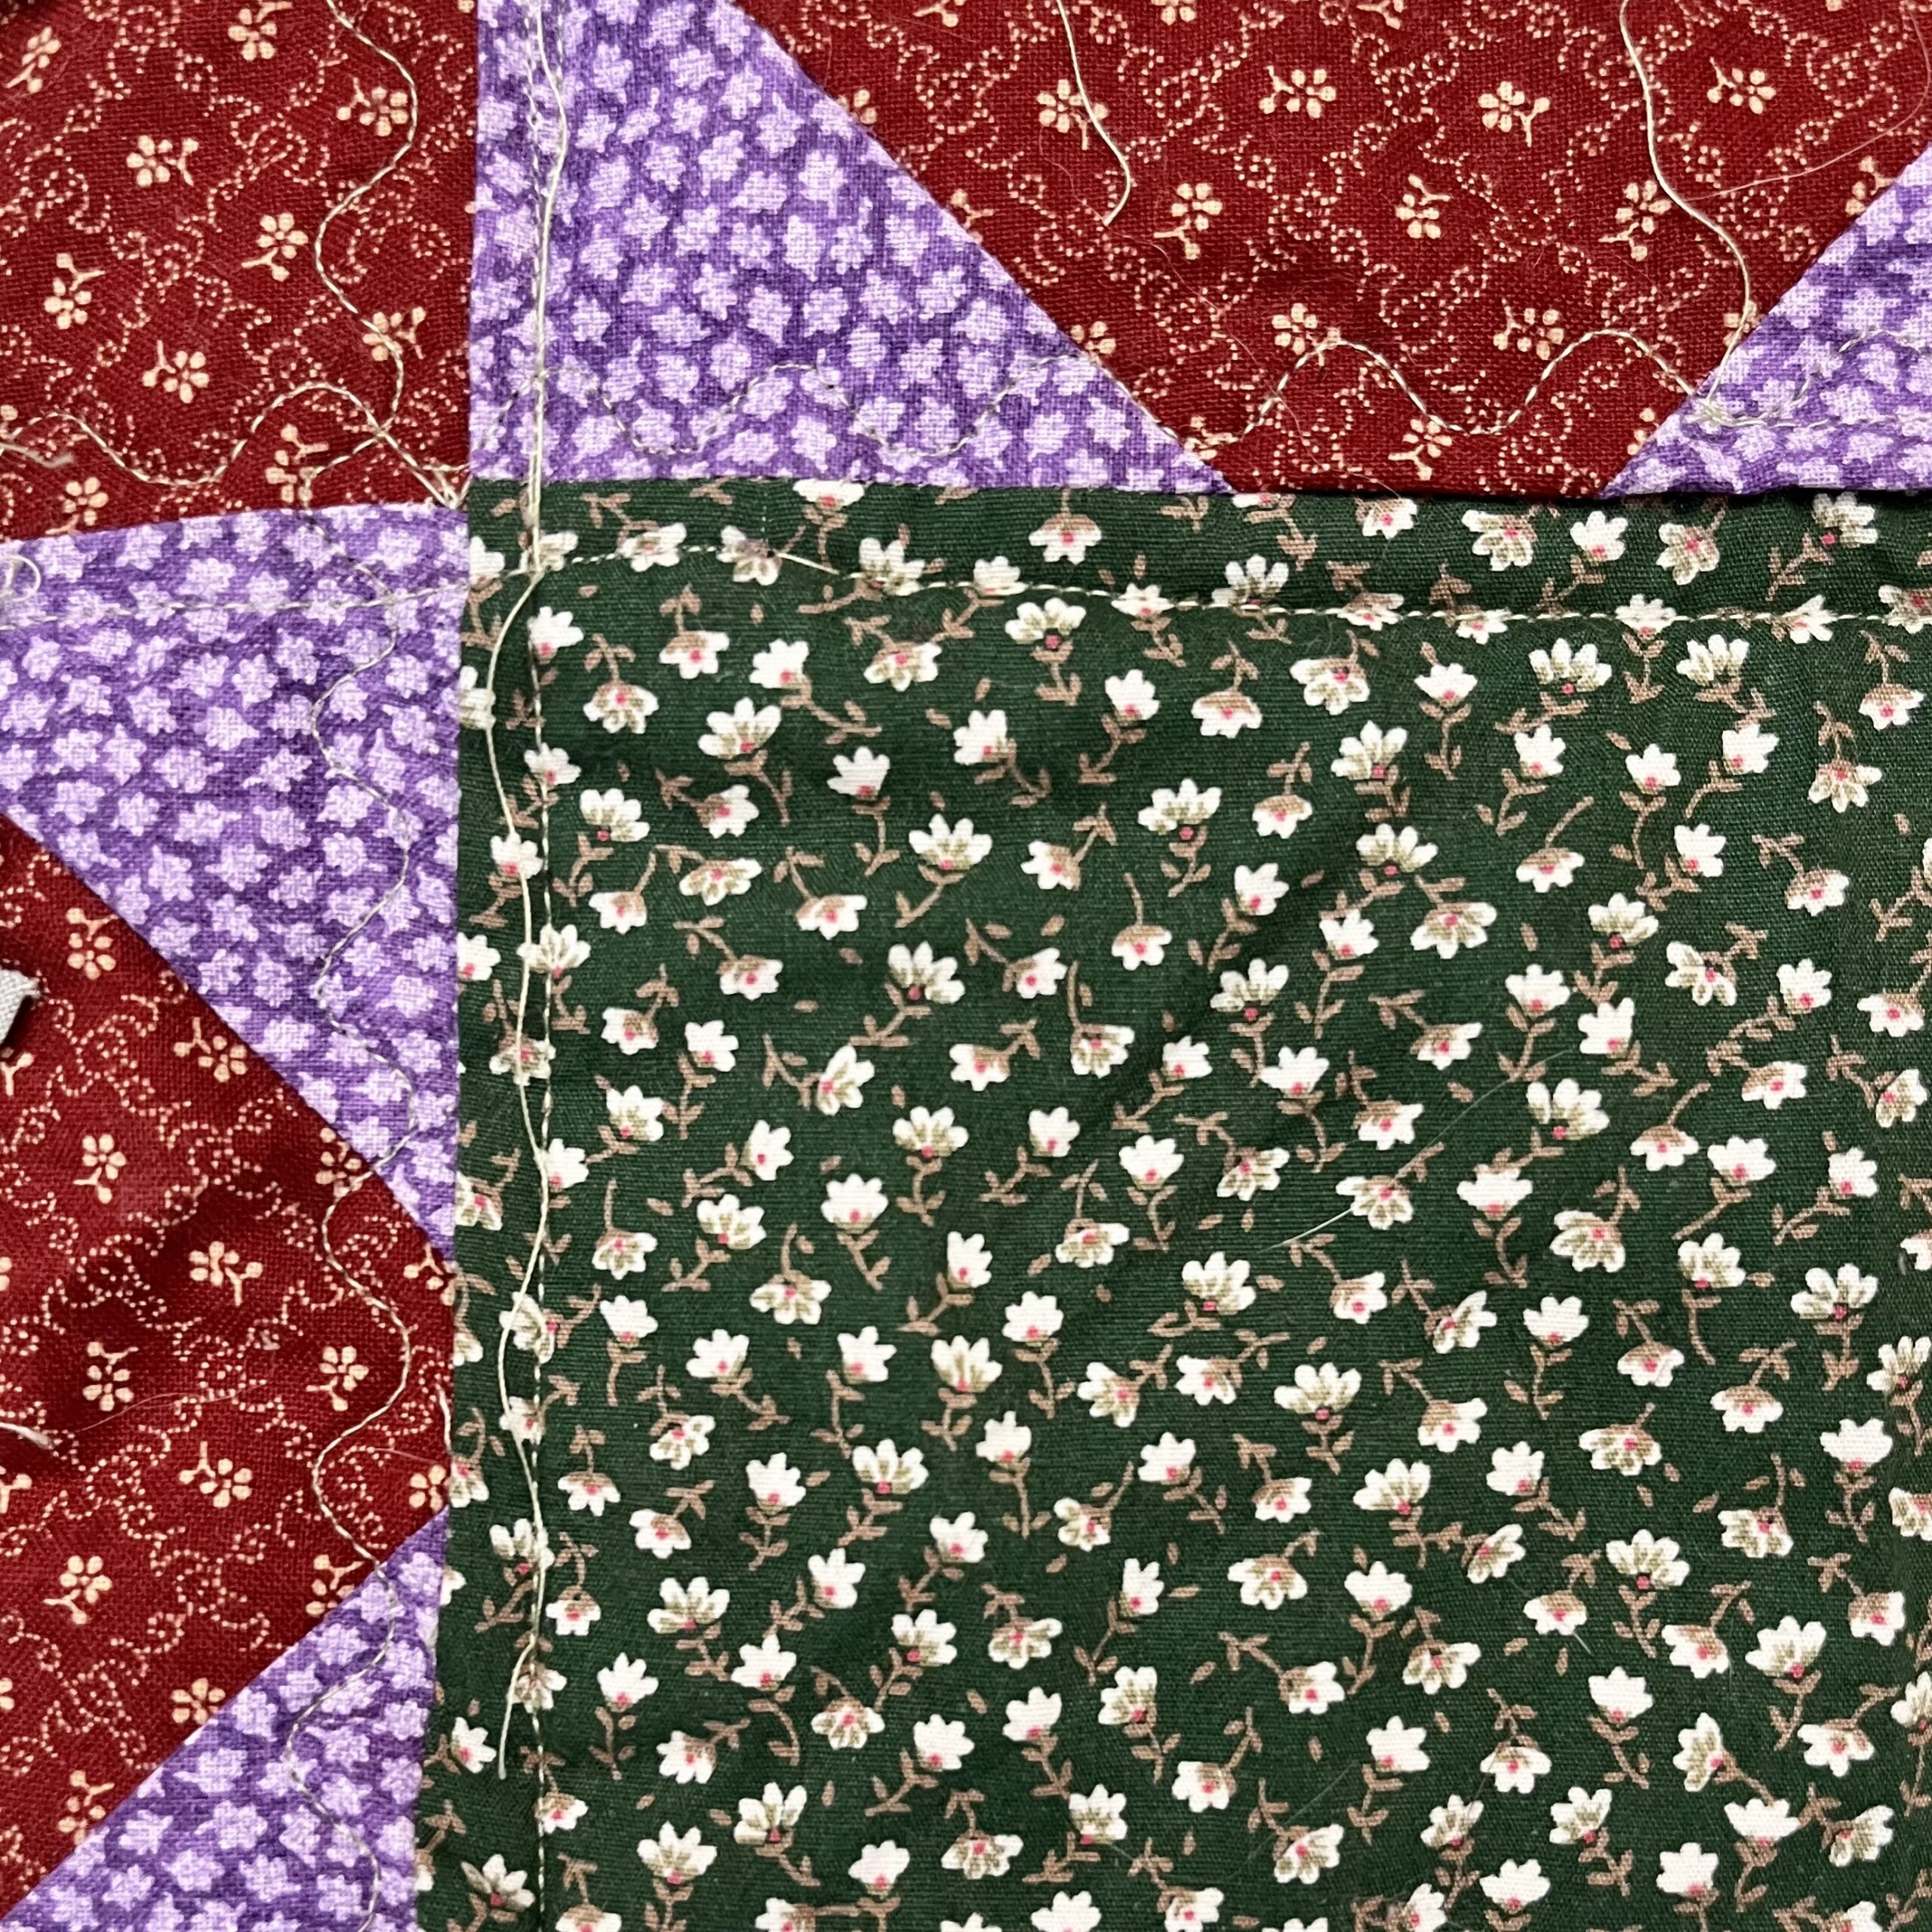 This image shows a closer look at one corner of the sawtooth star pattern on the front of the quilt. One corner of the green square with a floral pattern is visible. Four purple floral triangles are visible, as well as three red squares. There is also visible stitching in green thread. 